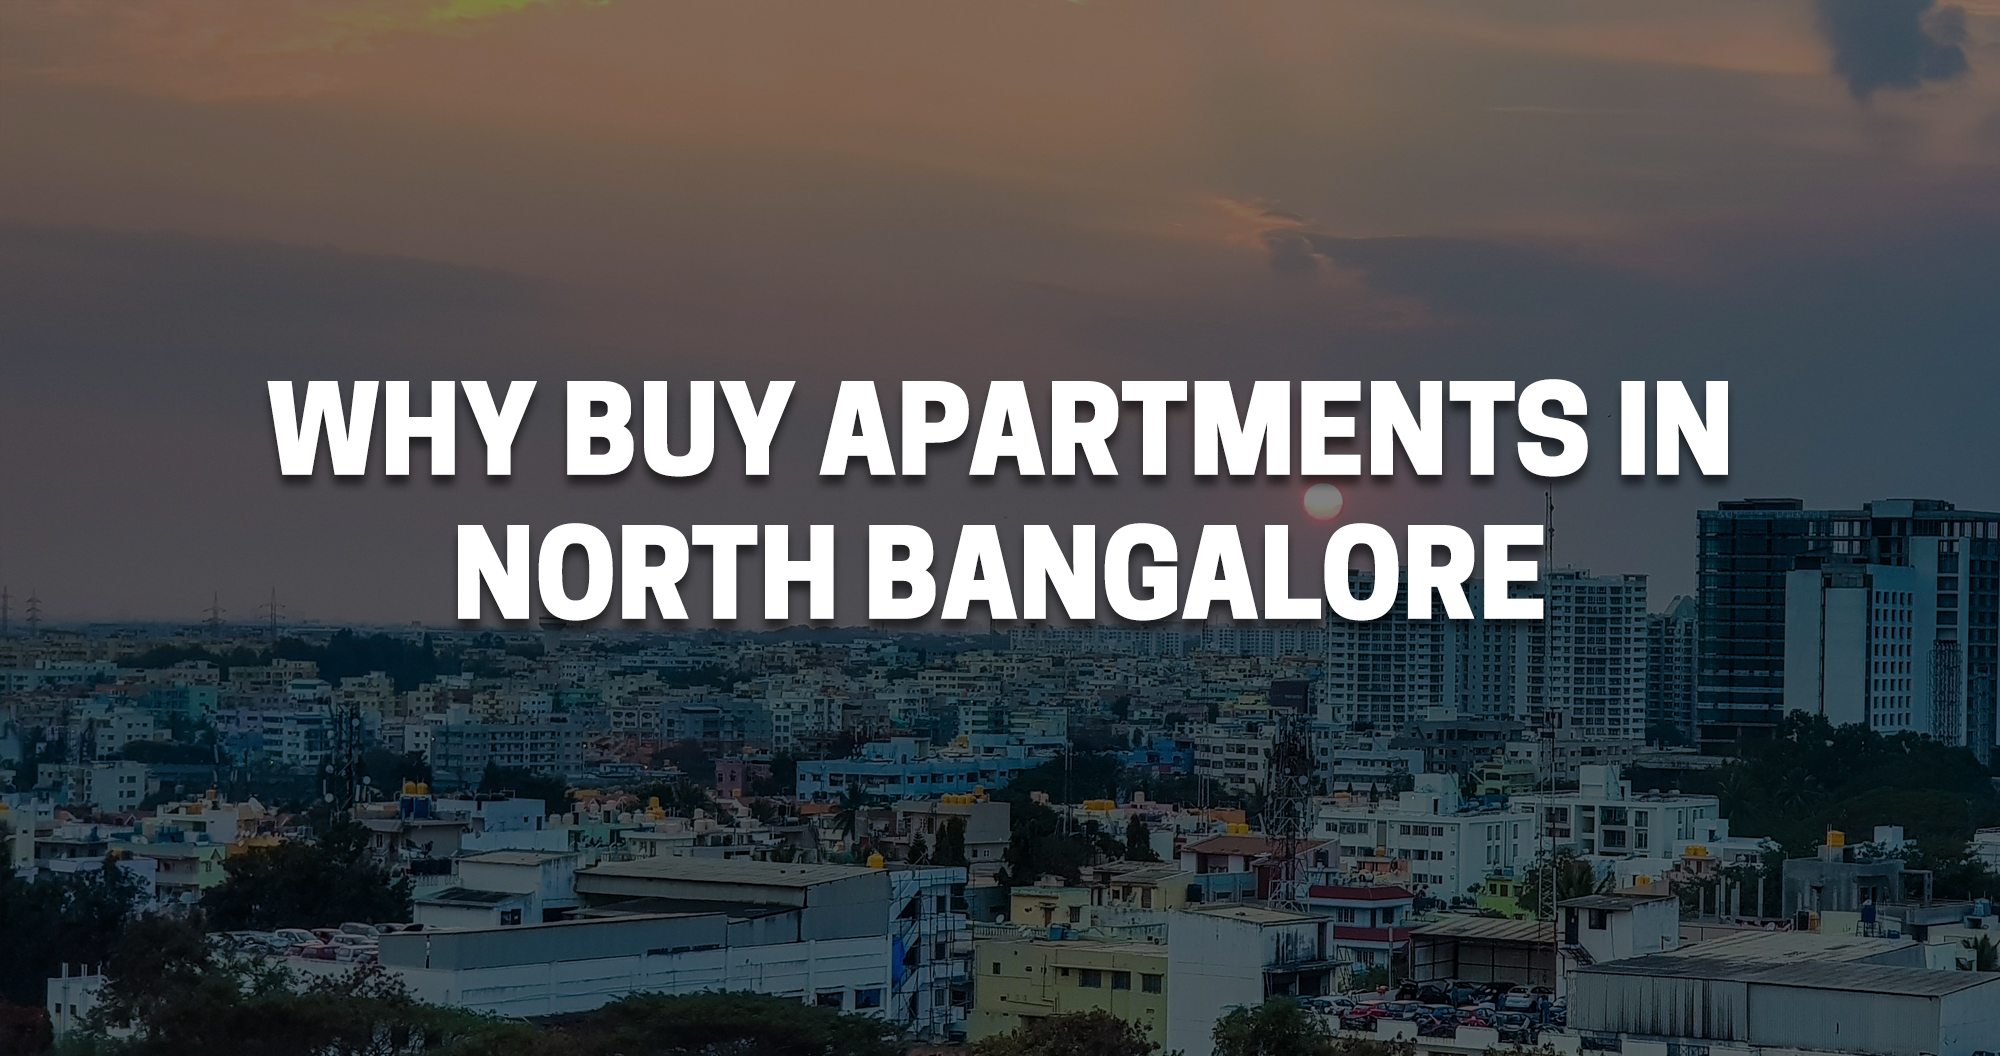 Why buy apartments in North Bangalore